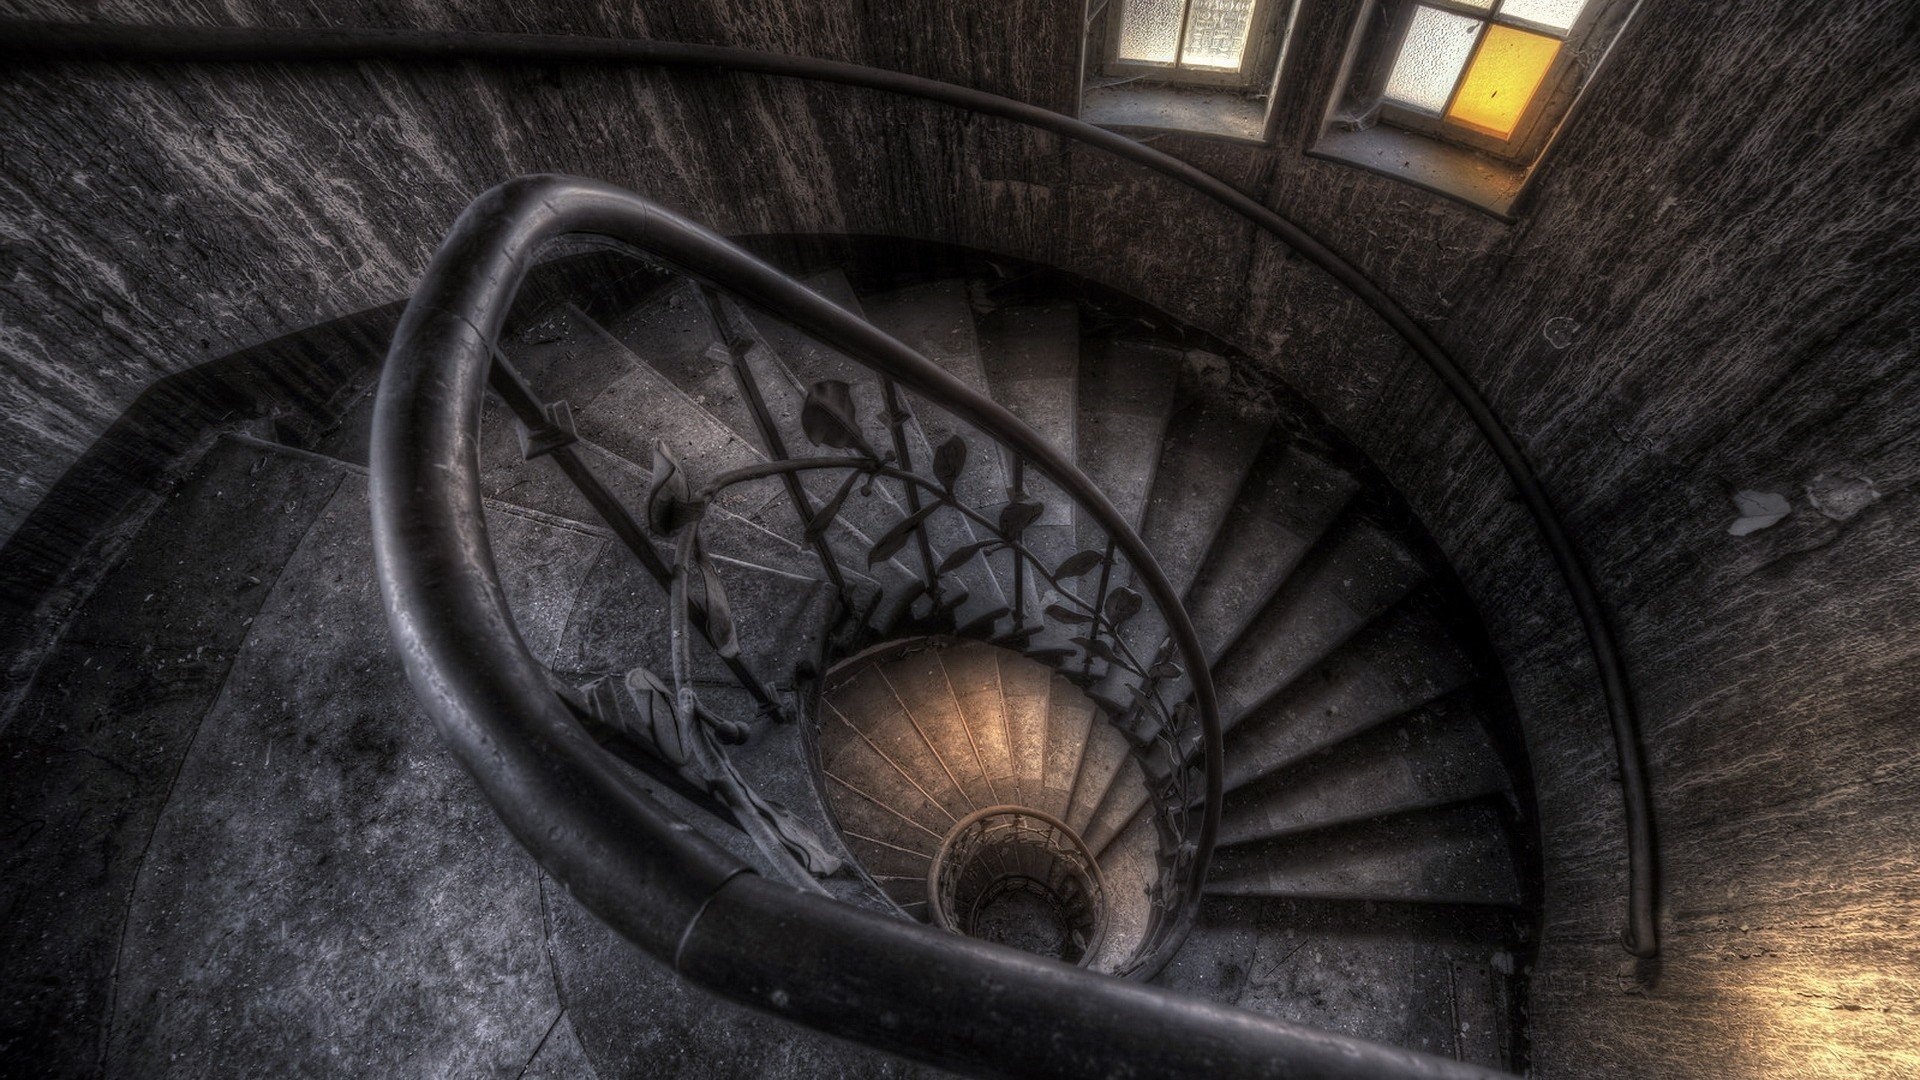 Wallpaper PX abandoned architecture building, HDR, House interior staircase, 1920x1080 Full HD Desktop